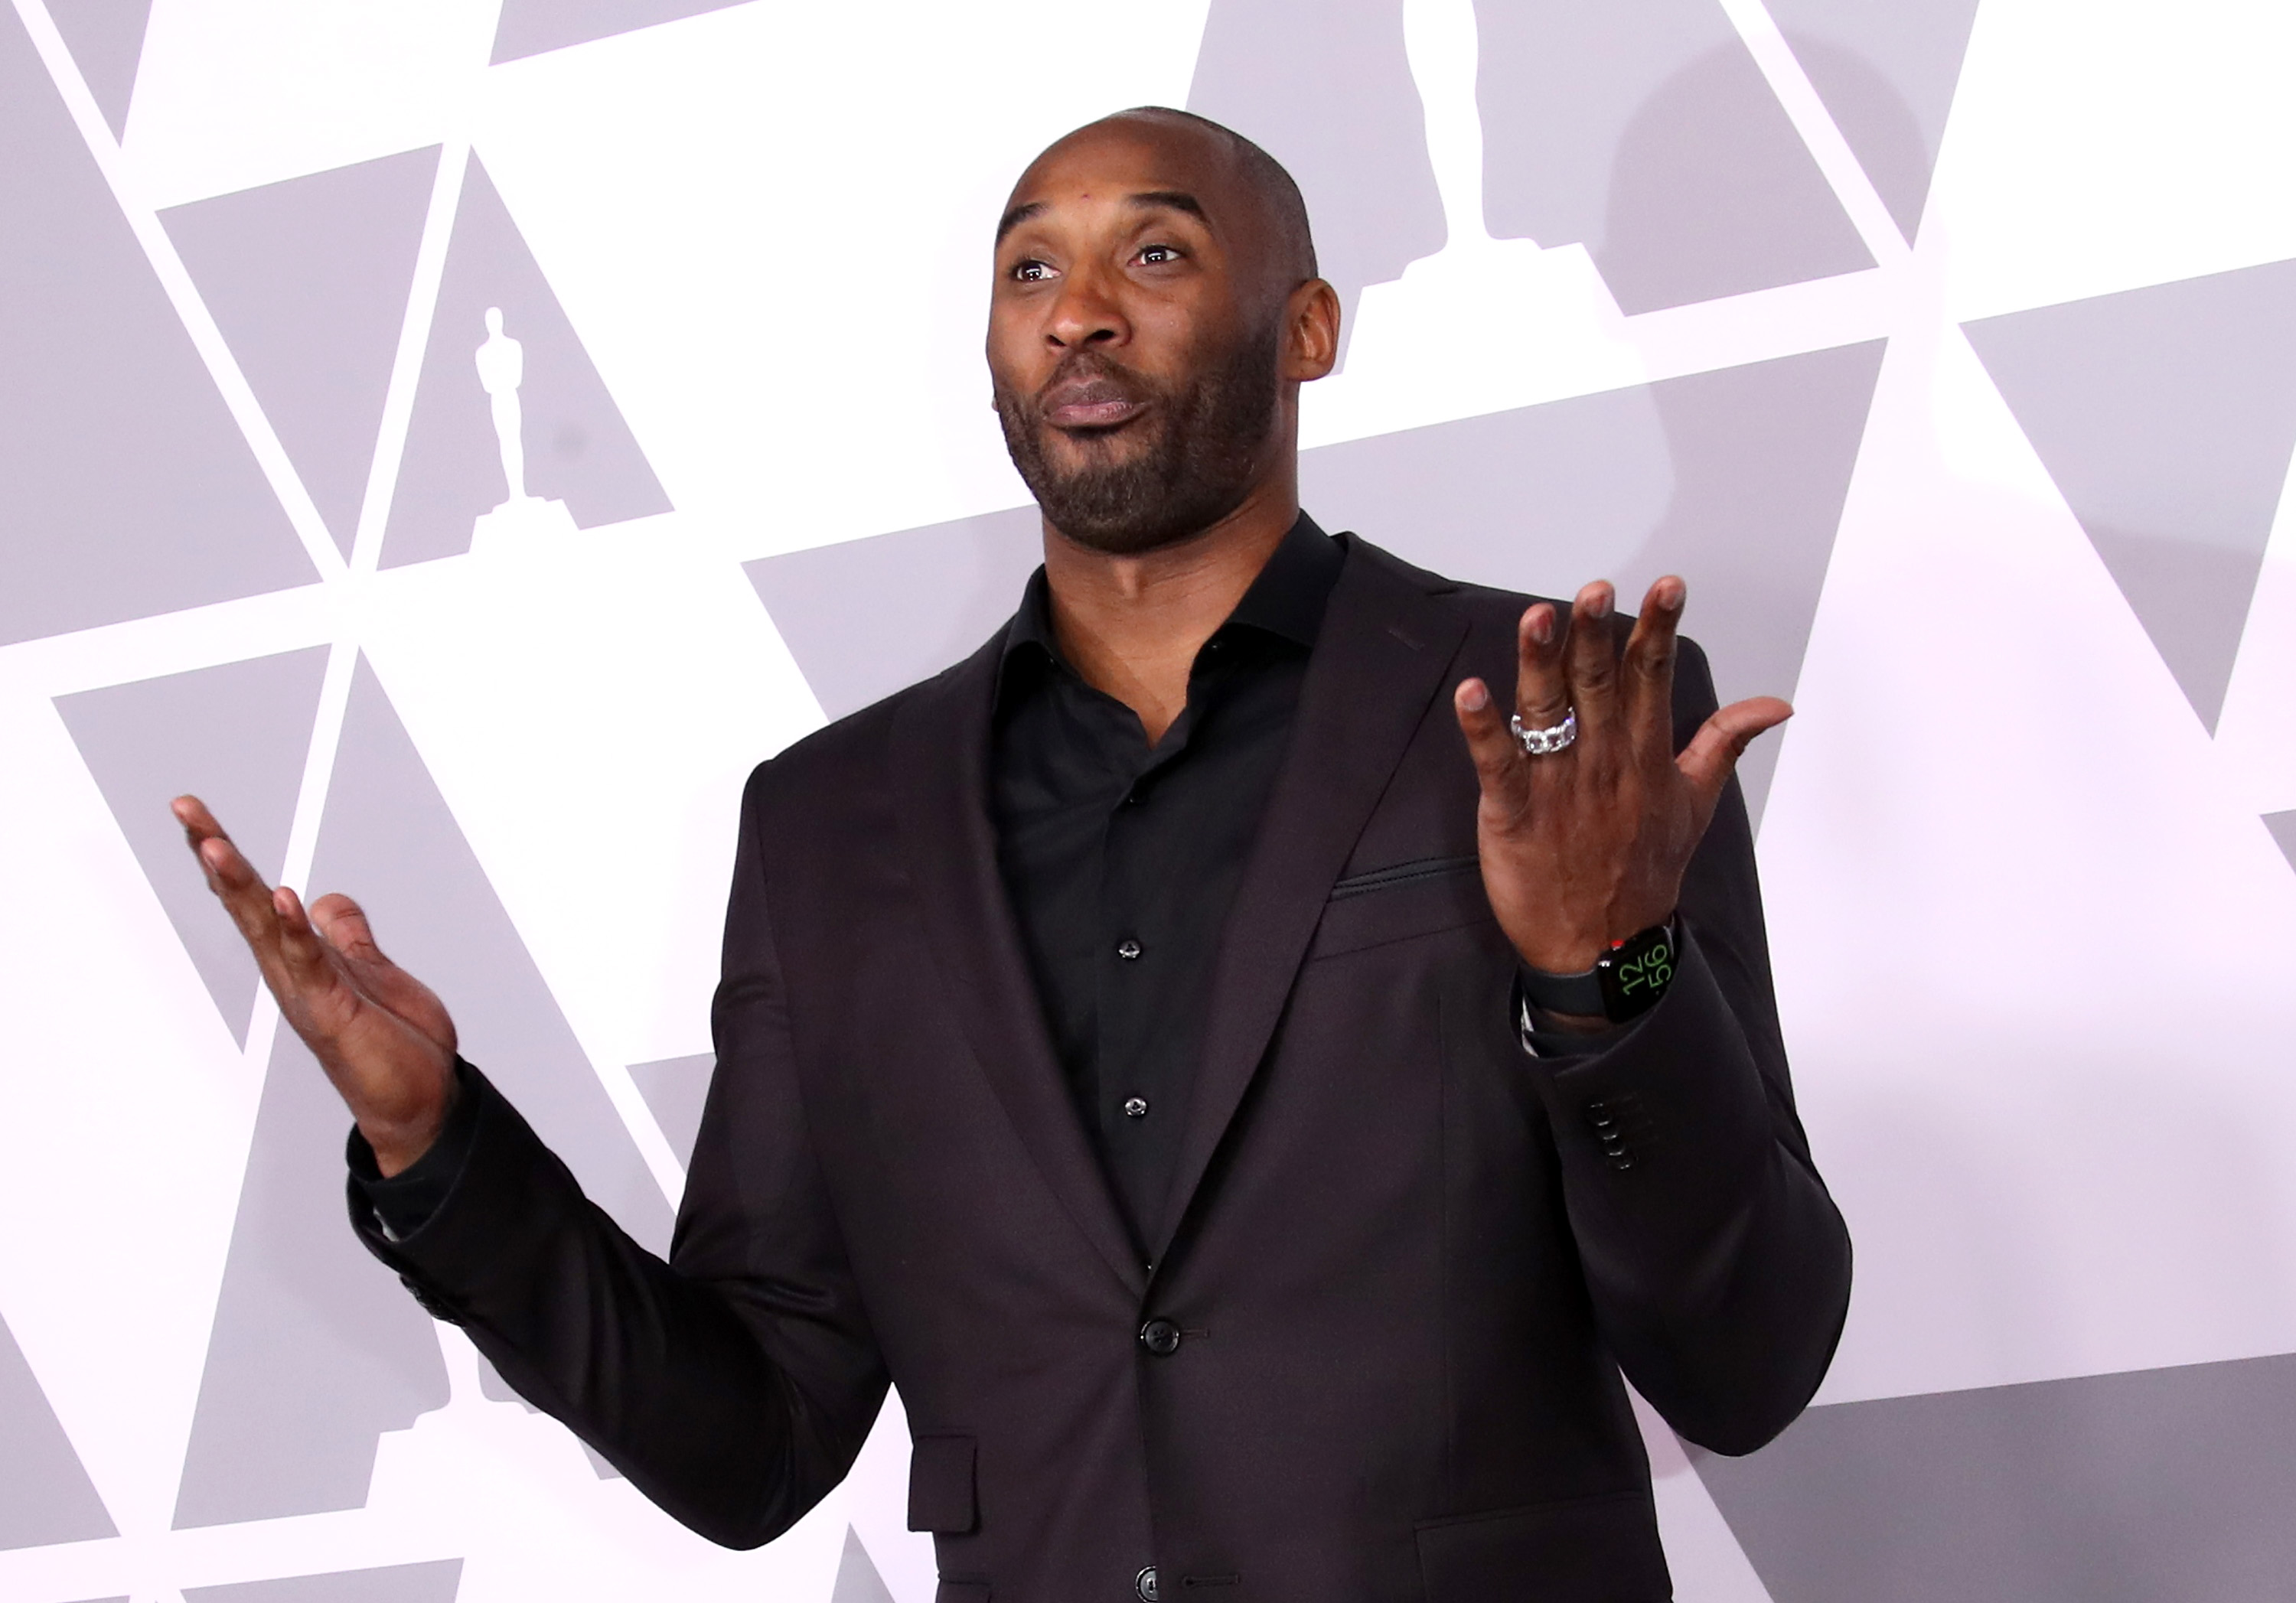 Kobe Bryant reaction to end of Super Bowl LII is priceless